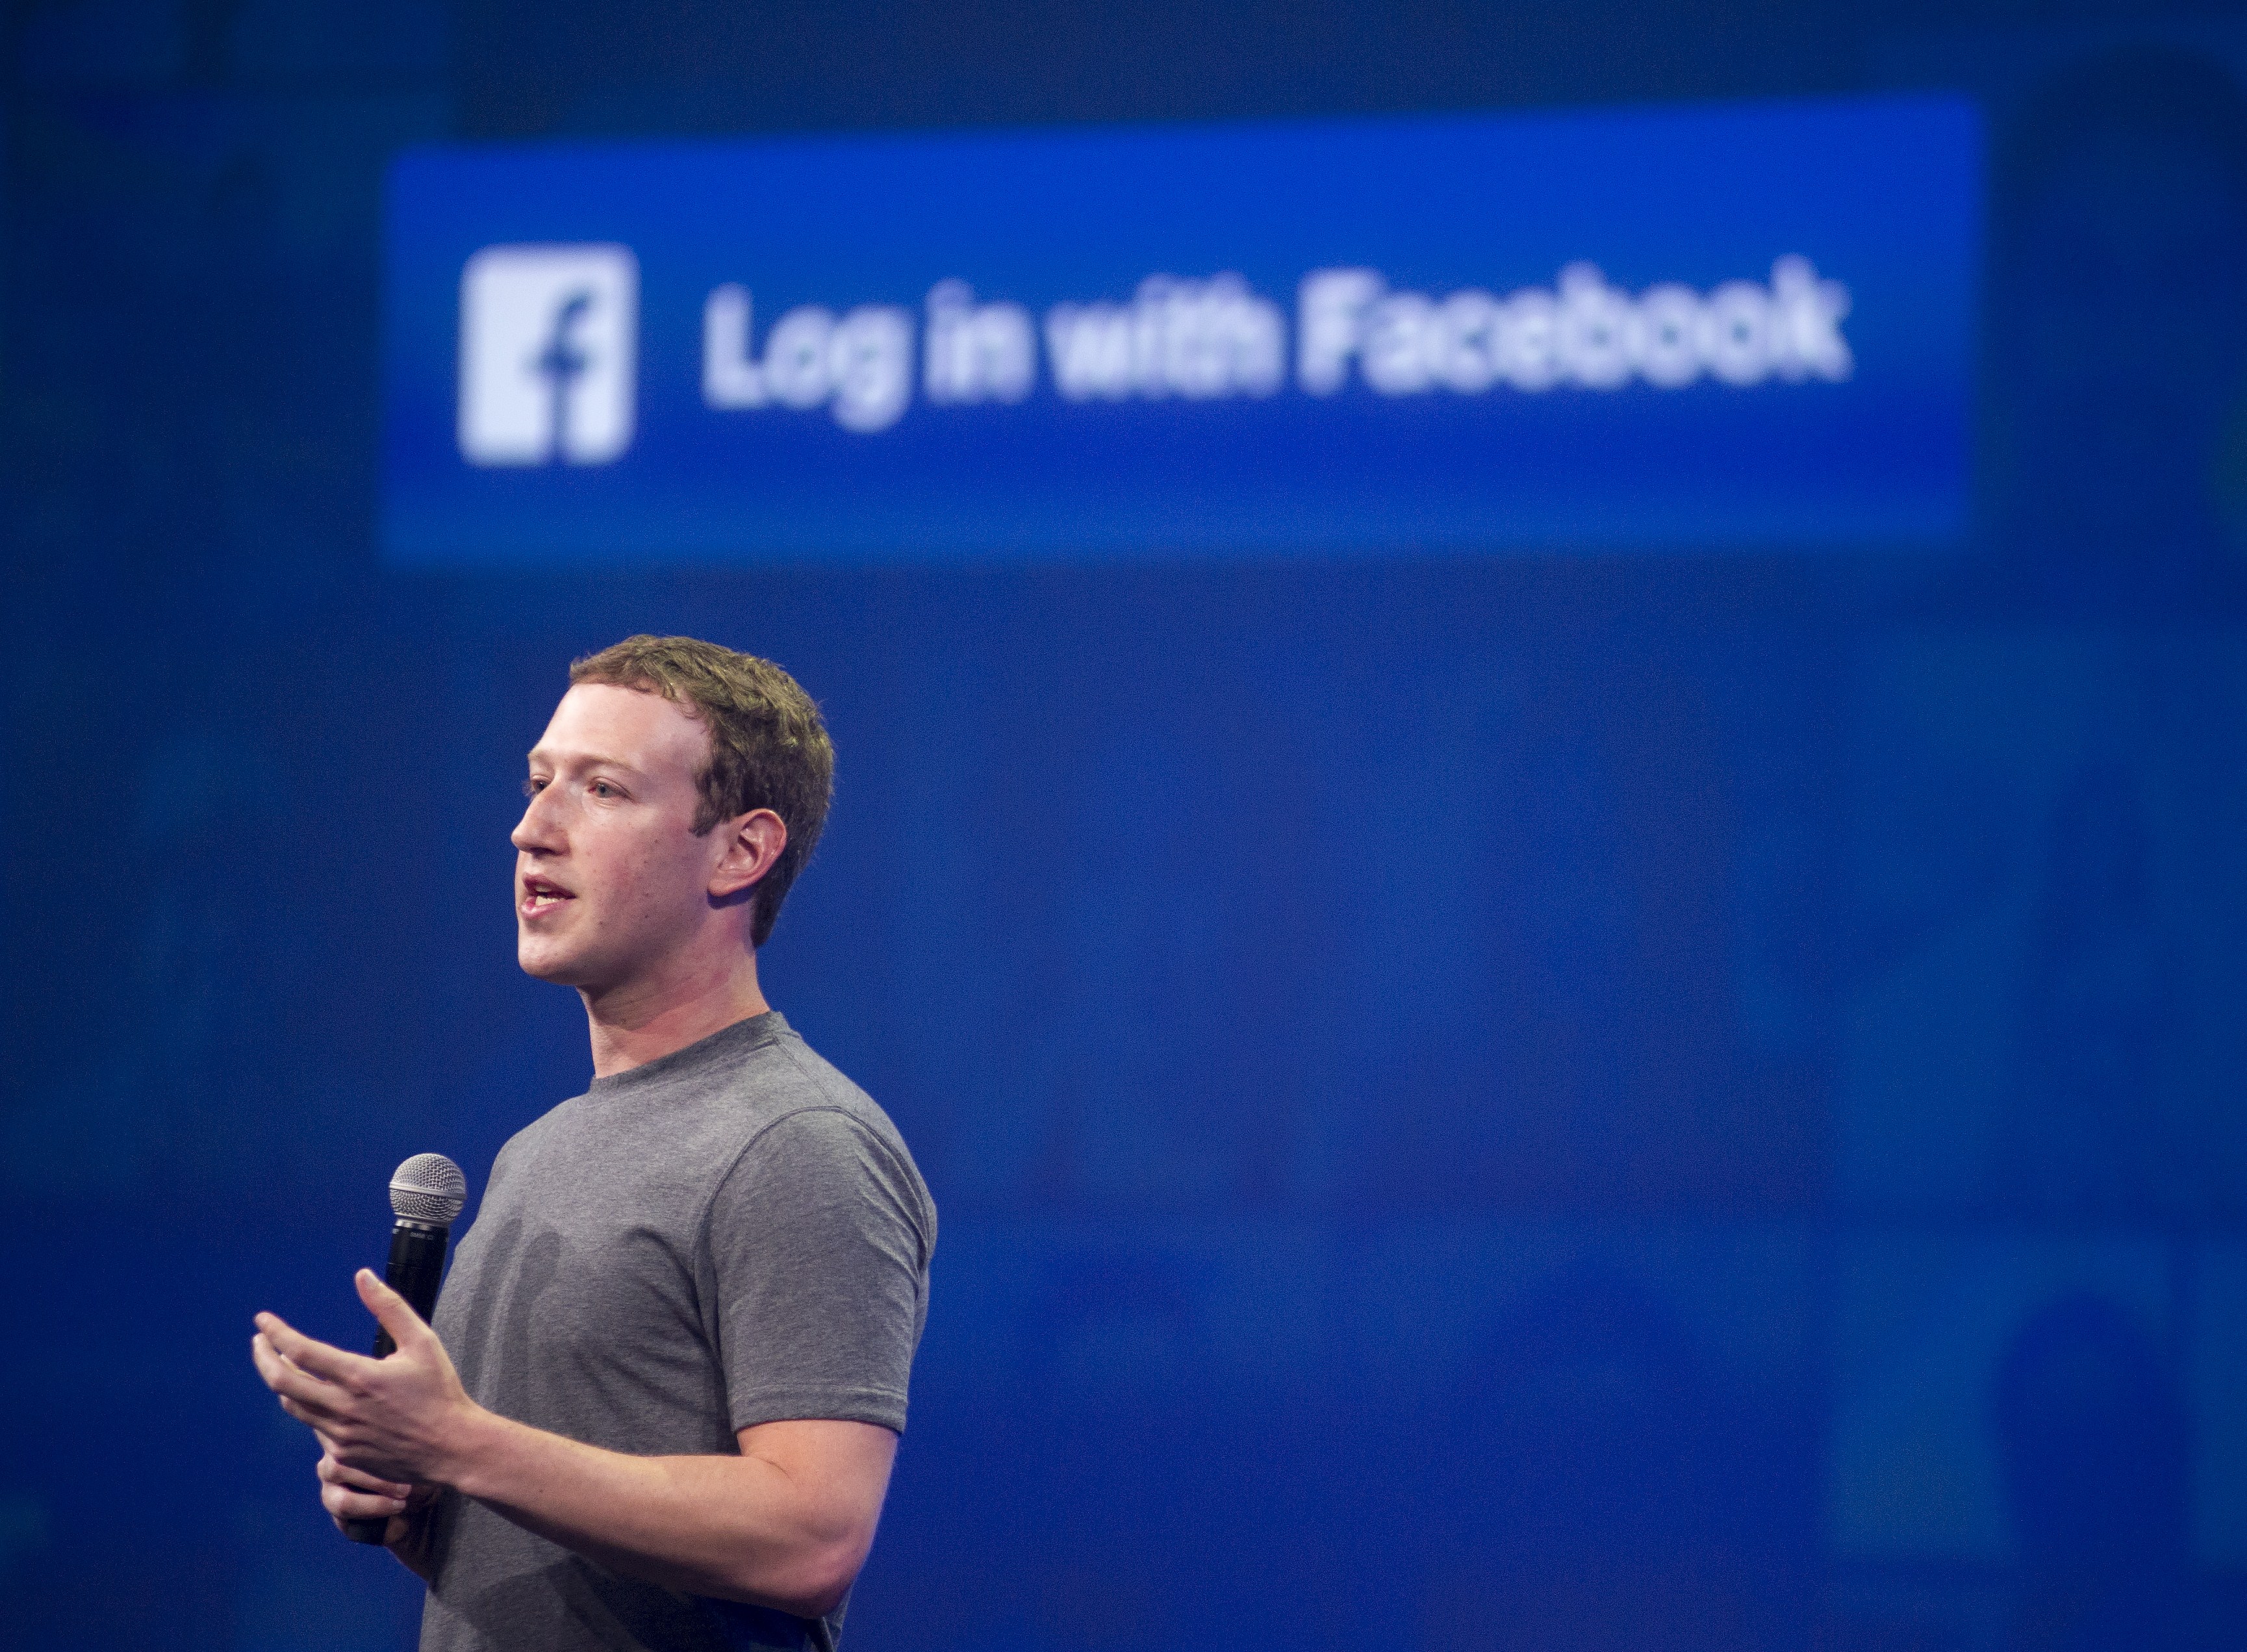 Facebook CEO Mark Zuckerberg speaks at the F8 summit in San Francisco, on March 25, 2015. (Josh Edelson—AFP/Getty Images)